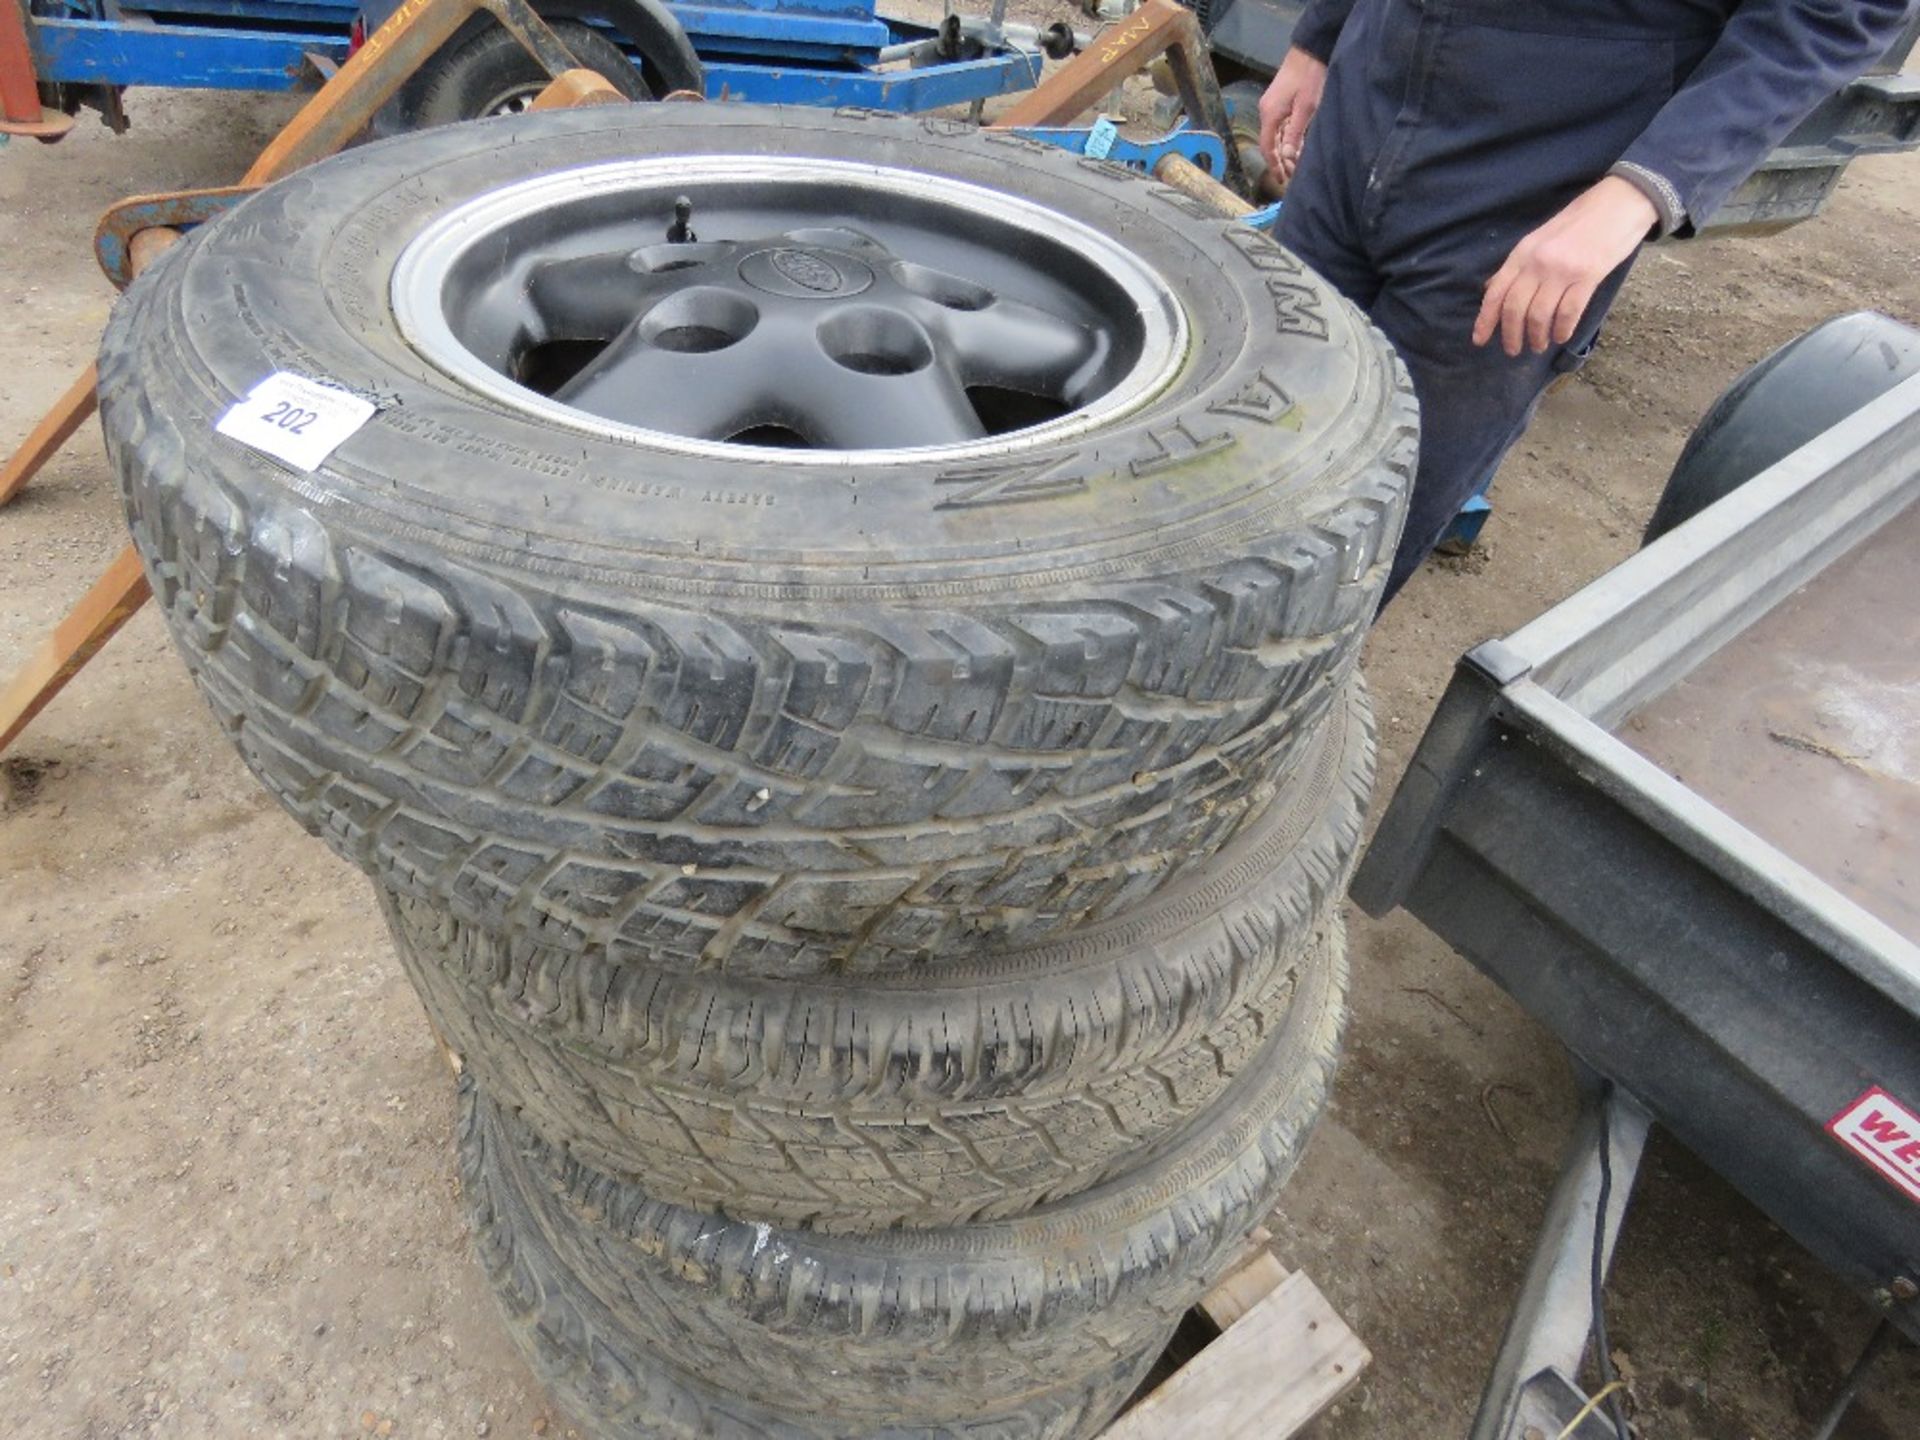 4 X LANDROVER ALLOY WHEELS AND TYRES 235/70R16 SIZE - Image 2 of 5